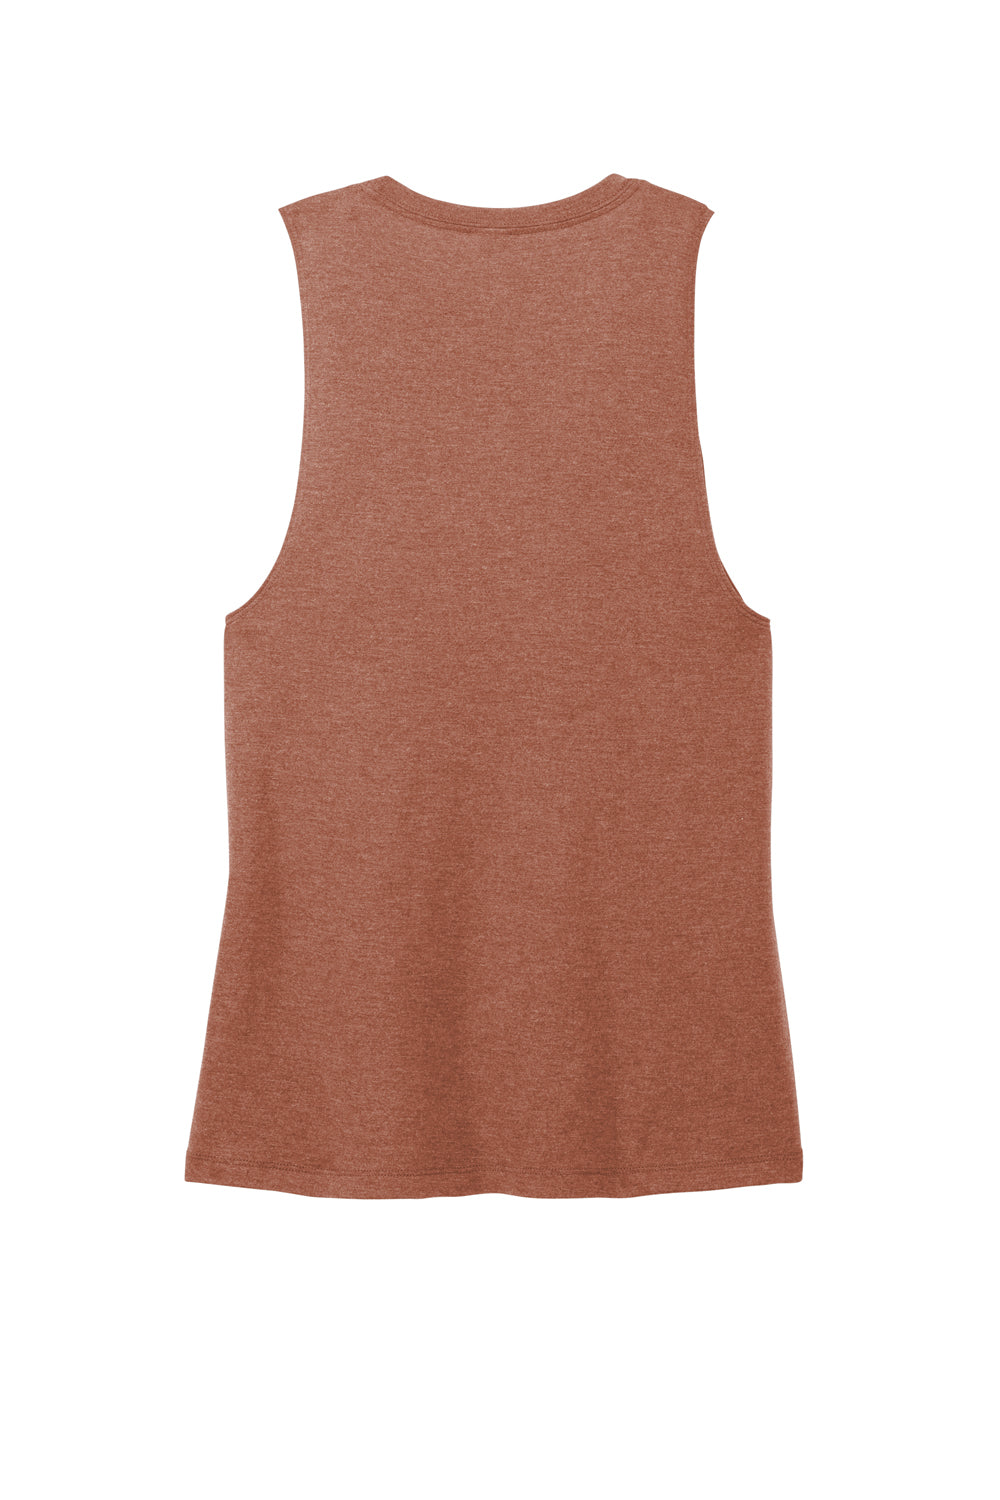 District DT153 Womens Perfect Tri Muscle Tank Top Heather Russet Red Flat Back